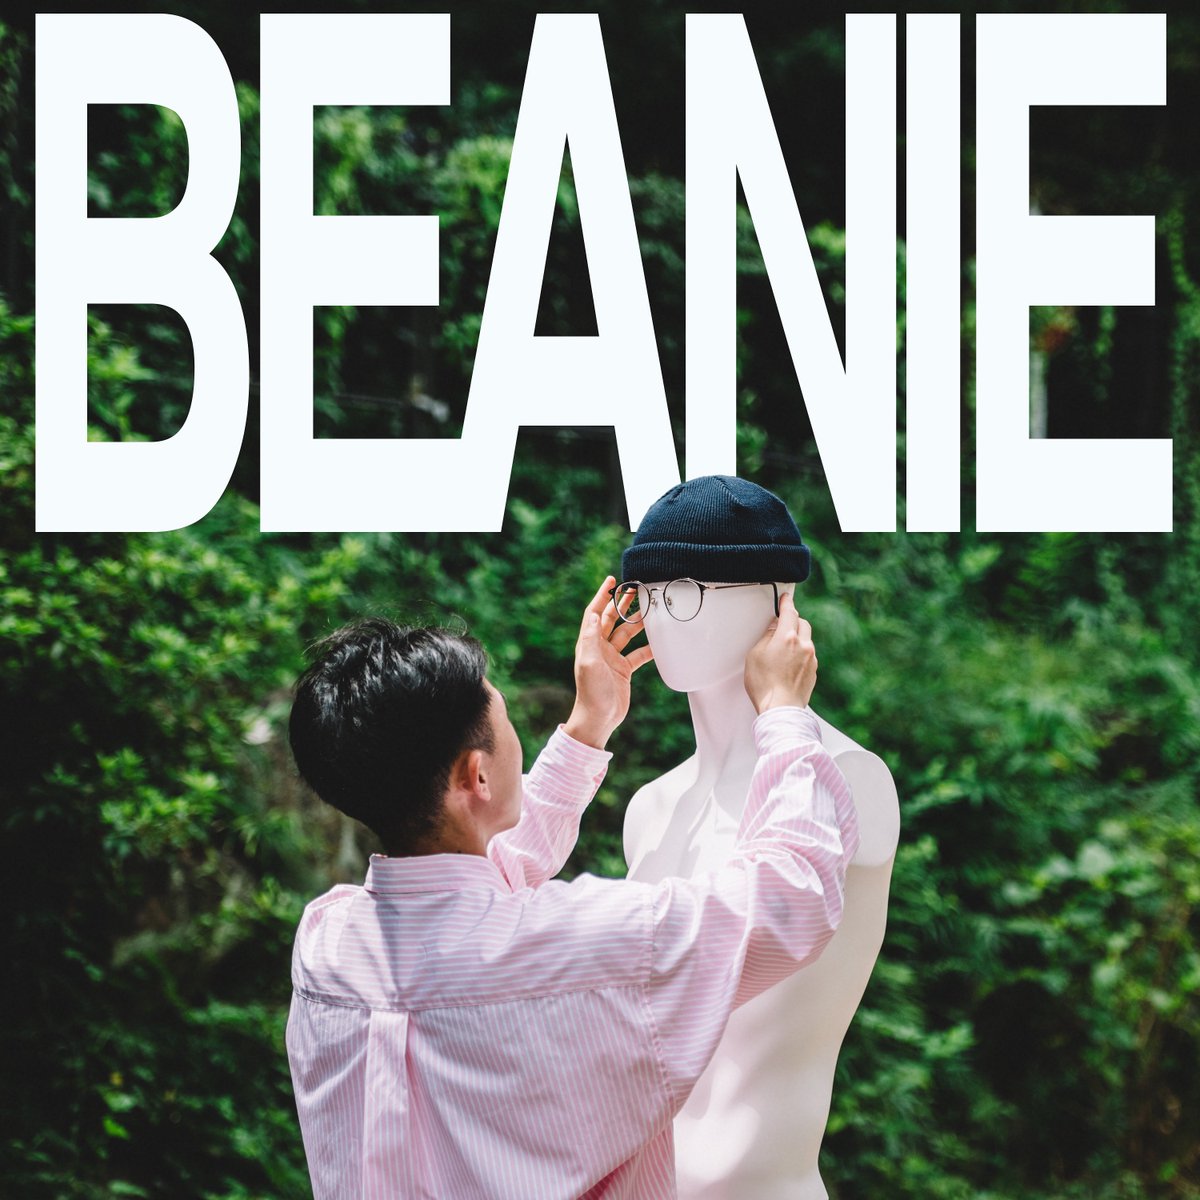 EP【BEANIE】OFFICIAL AUDIO RELEASE🎞EP収録曲のうち、『BEANIE』『I TASTE YOU』『FOR ME』『FLOATING EYES』以上4曲のOfficial AudioをYouTubeにてリリースしました🎥字幕はONで、リリックと一緒に聴いてね。感じたことをコメントで教えてくれ✌️ 